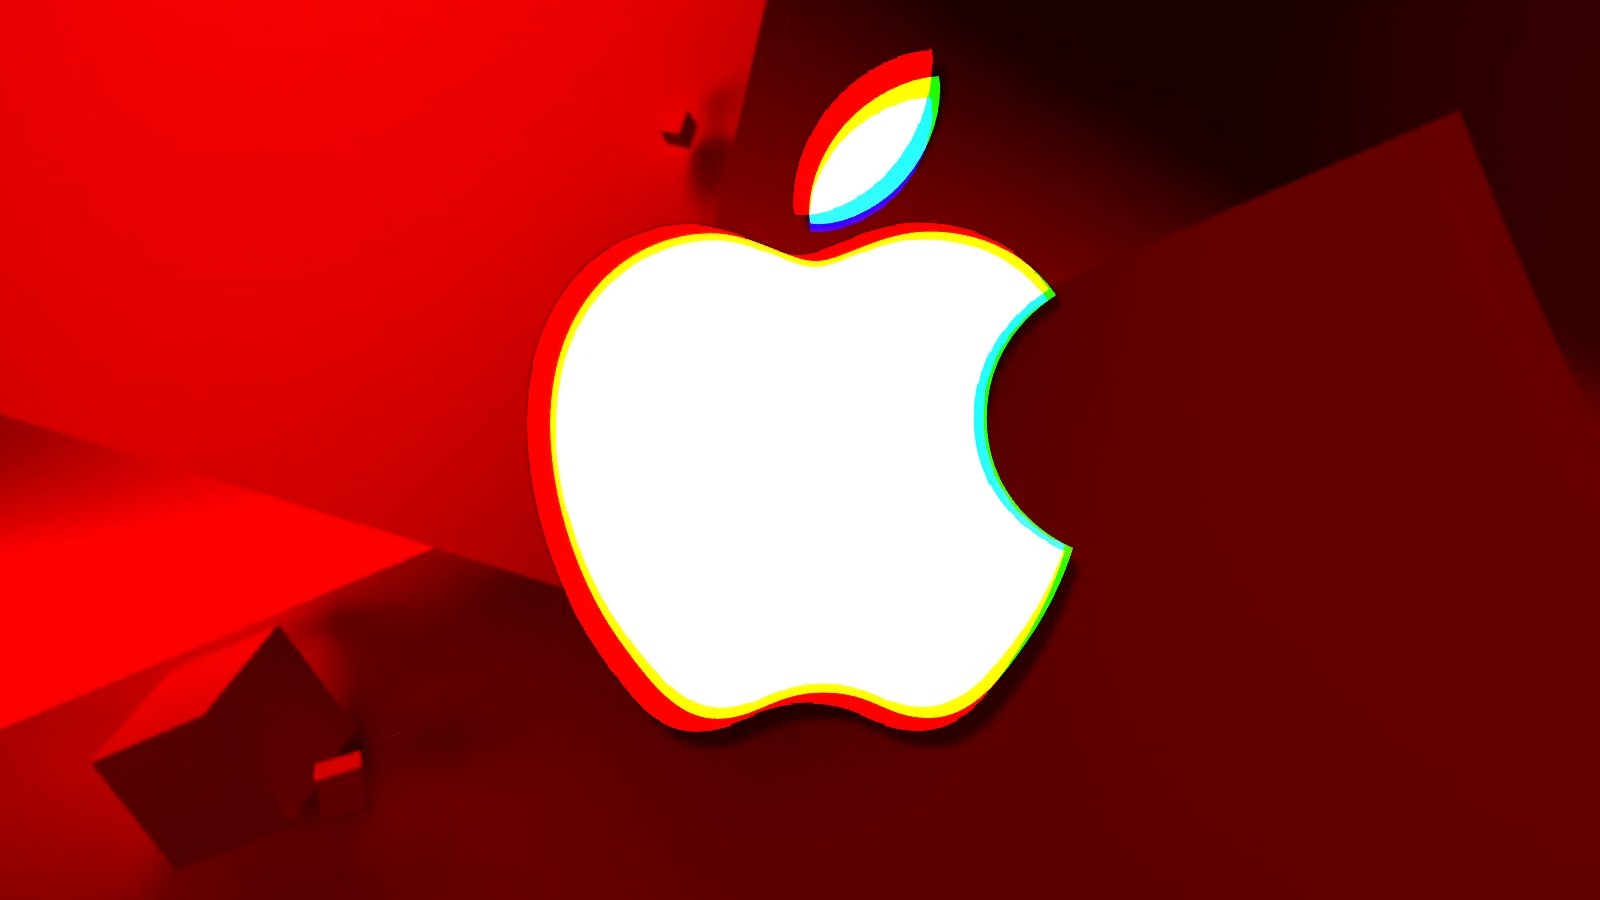 Apple discloses 2 new zero-days exploited to attack iPhones, Macs – Source: www.bleepingcomputer.com